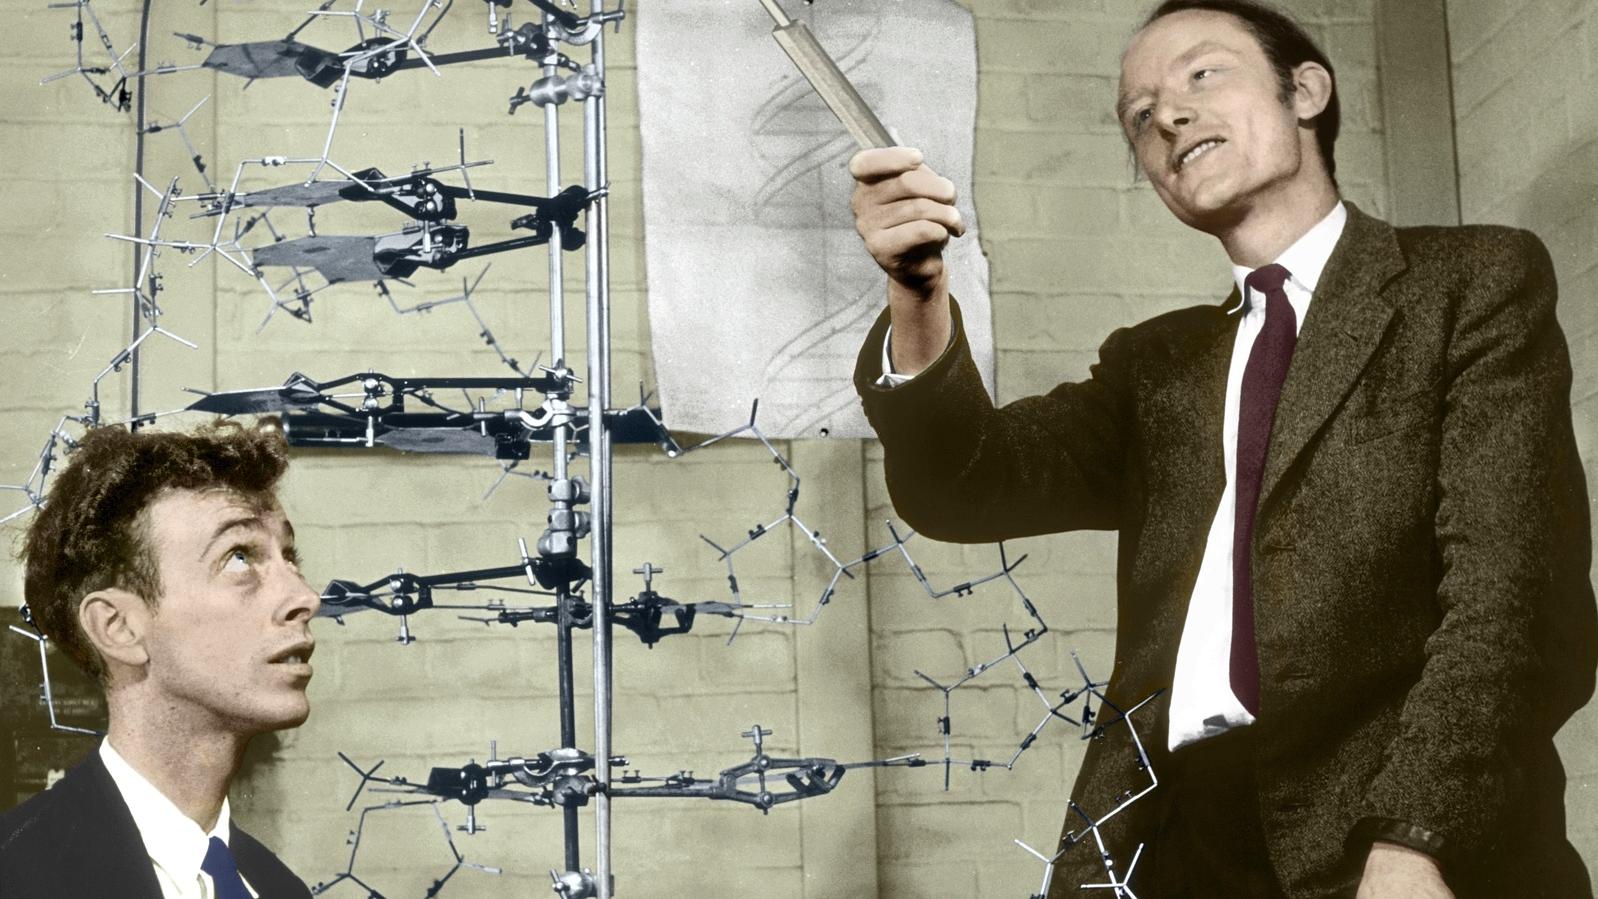 James Watson (left) and Francis Crick with their DNA model. (source)